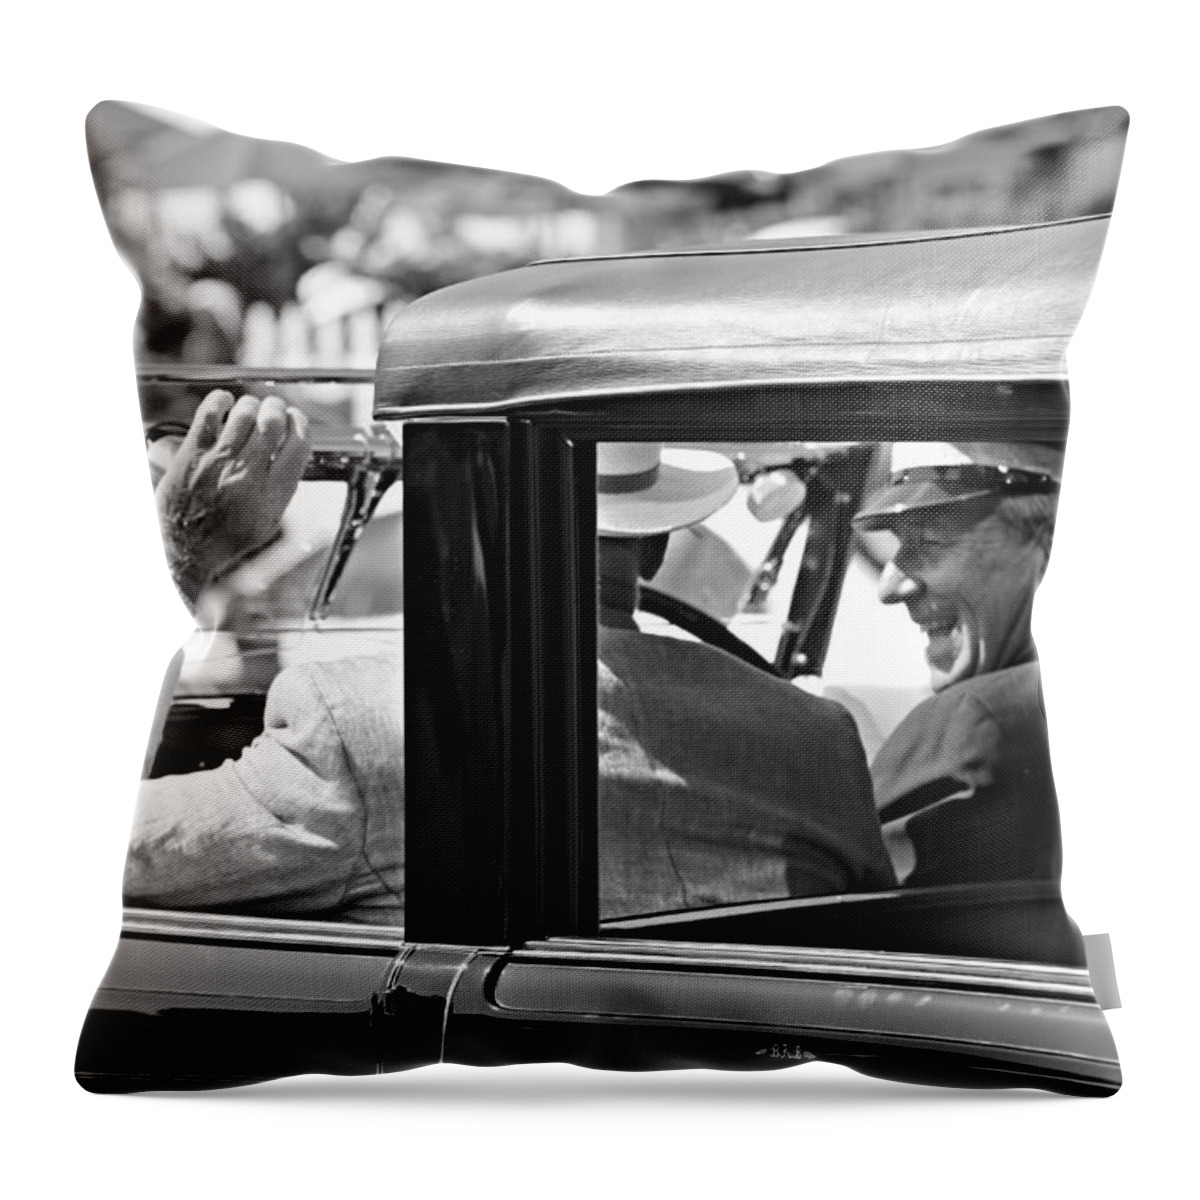 Hipano-suiza Throw Pillow featuring the photograph Town Car at Pebble Beach by Steve Natale